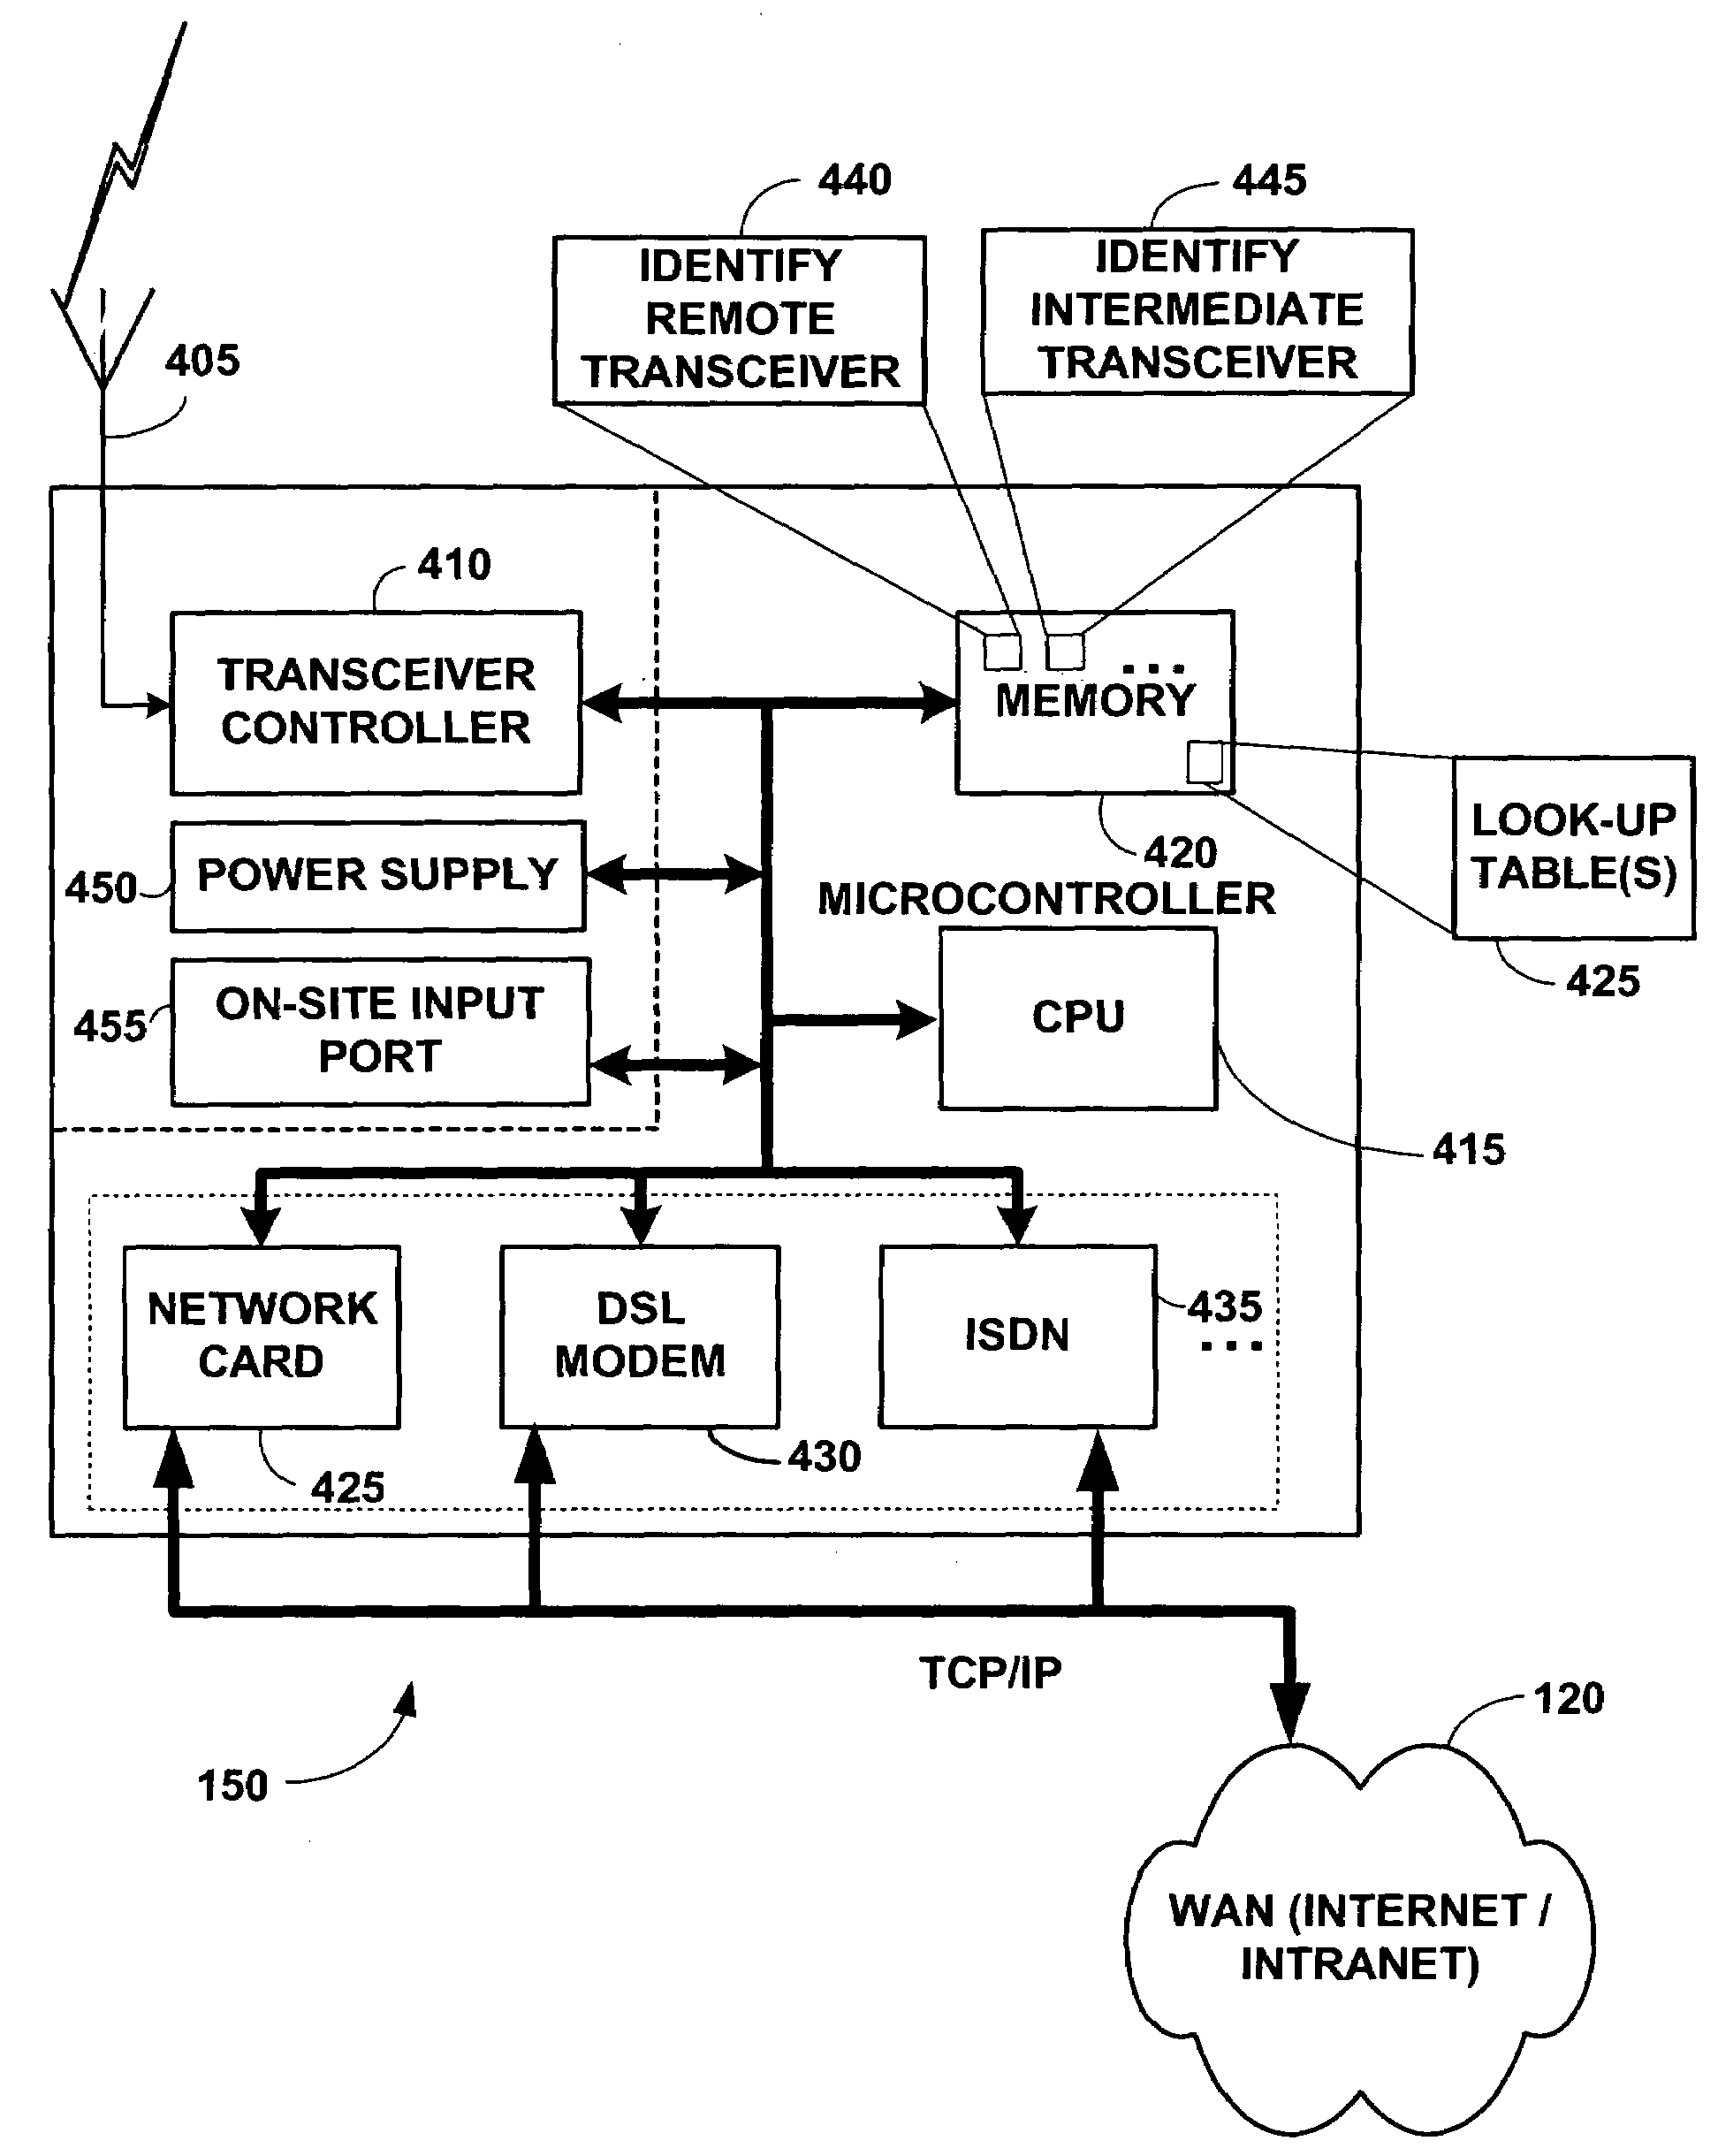 Systems and methods for providing remote monitoring of electricity consumption for an electric meter